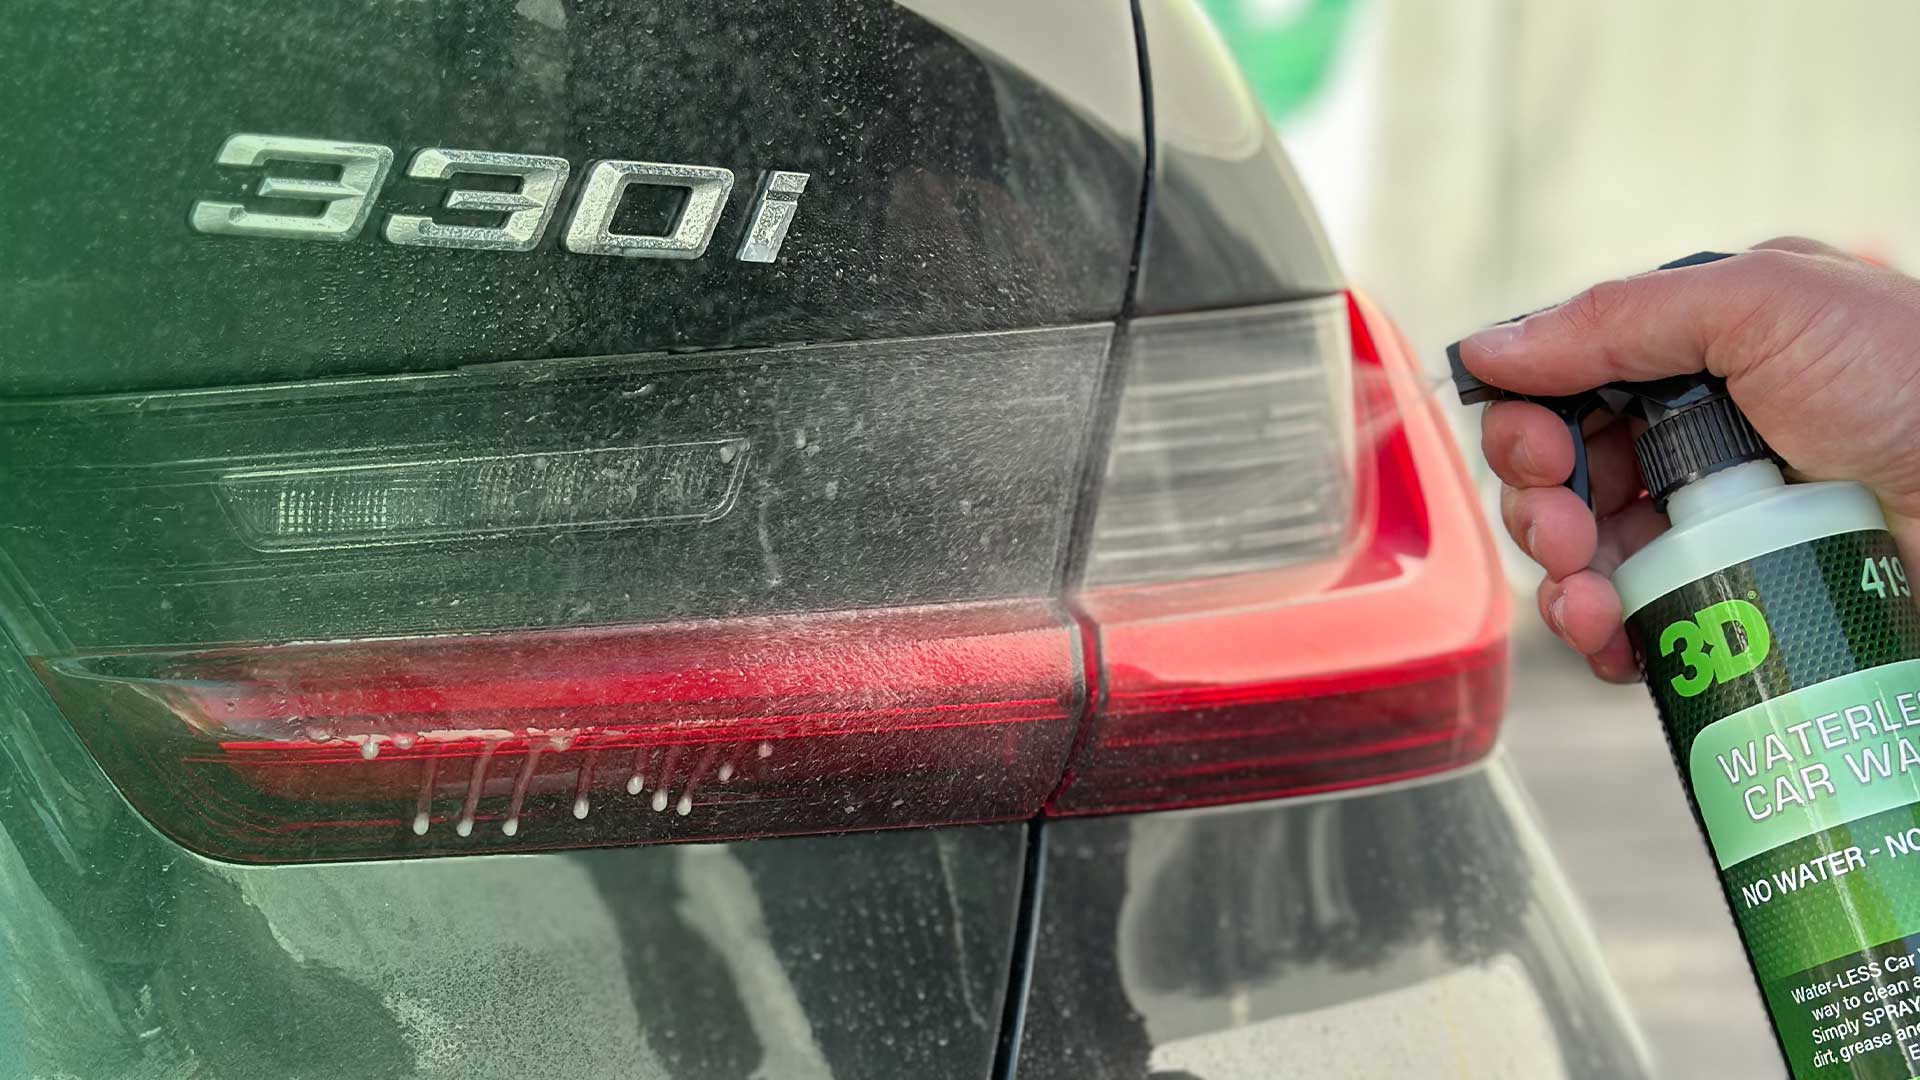 The Ultimate Guide to Scratch-Free Car Washing